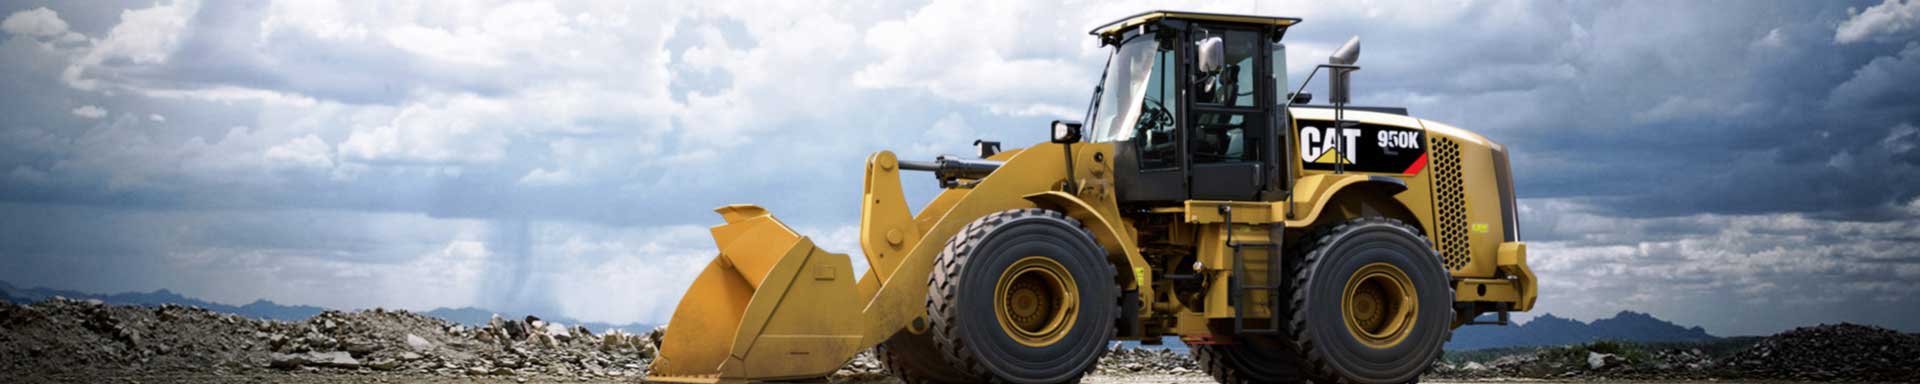 Machinery and Equipment Appraisal Professionals in Montreal